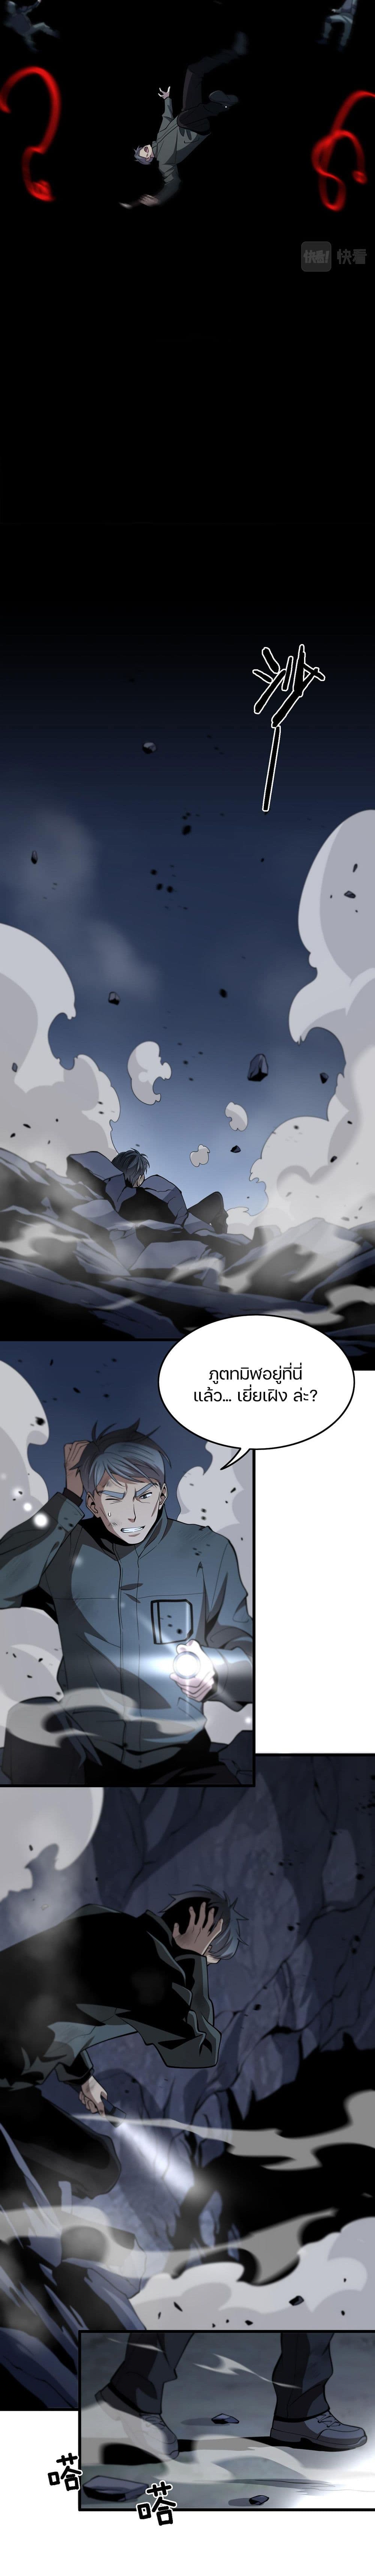 The Grand Master came down from the Mountain 20-เส้นทางที่ไม่สิ้นสุด